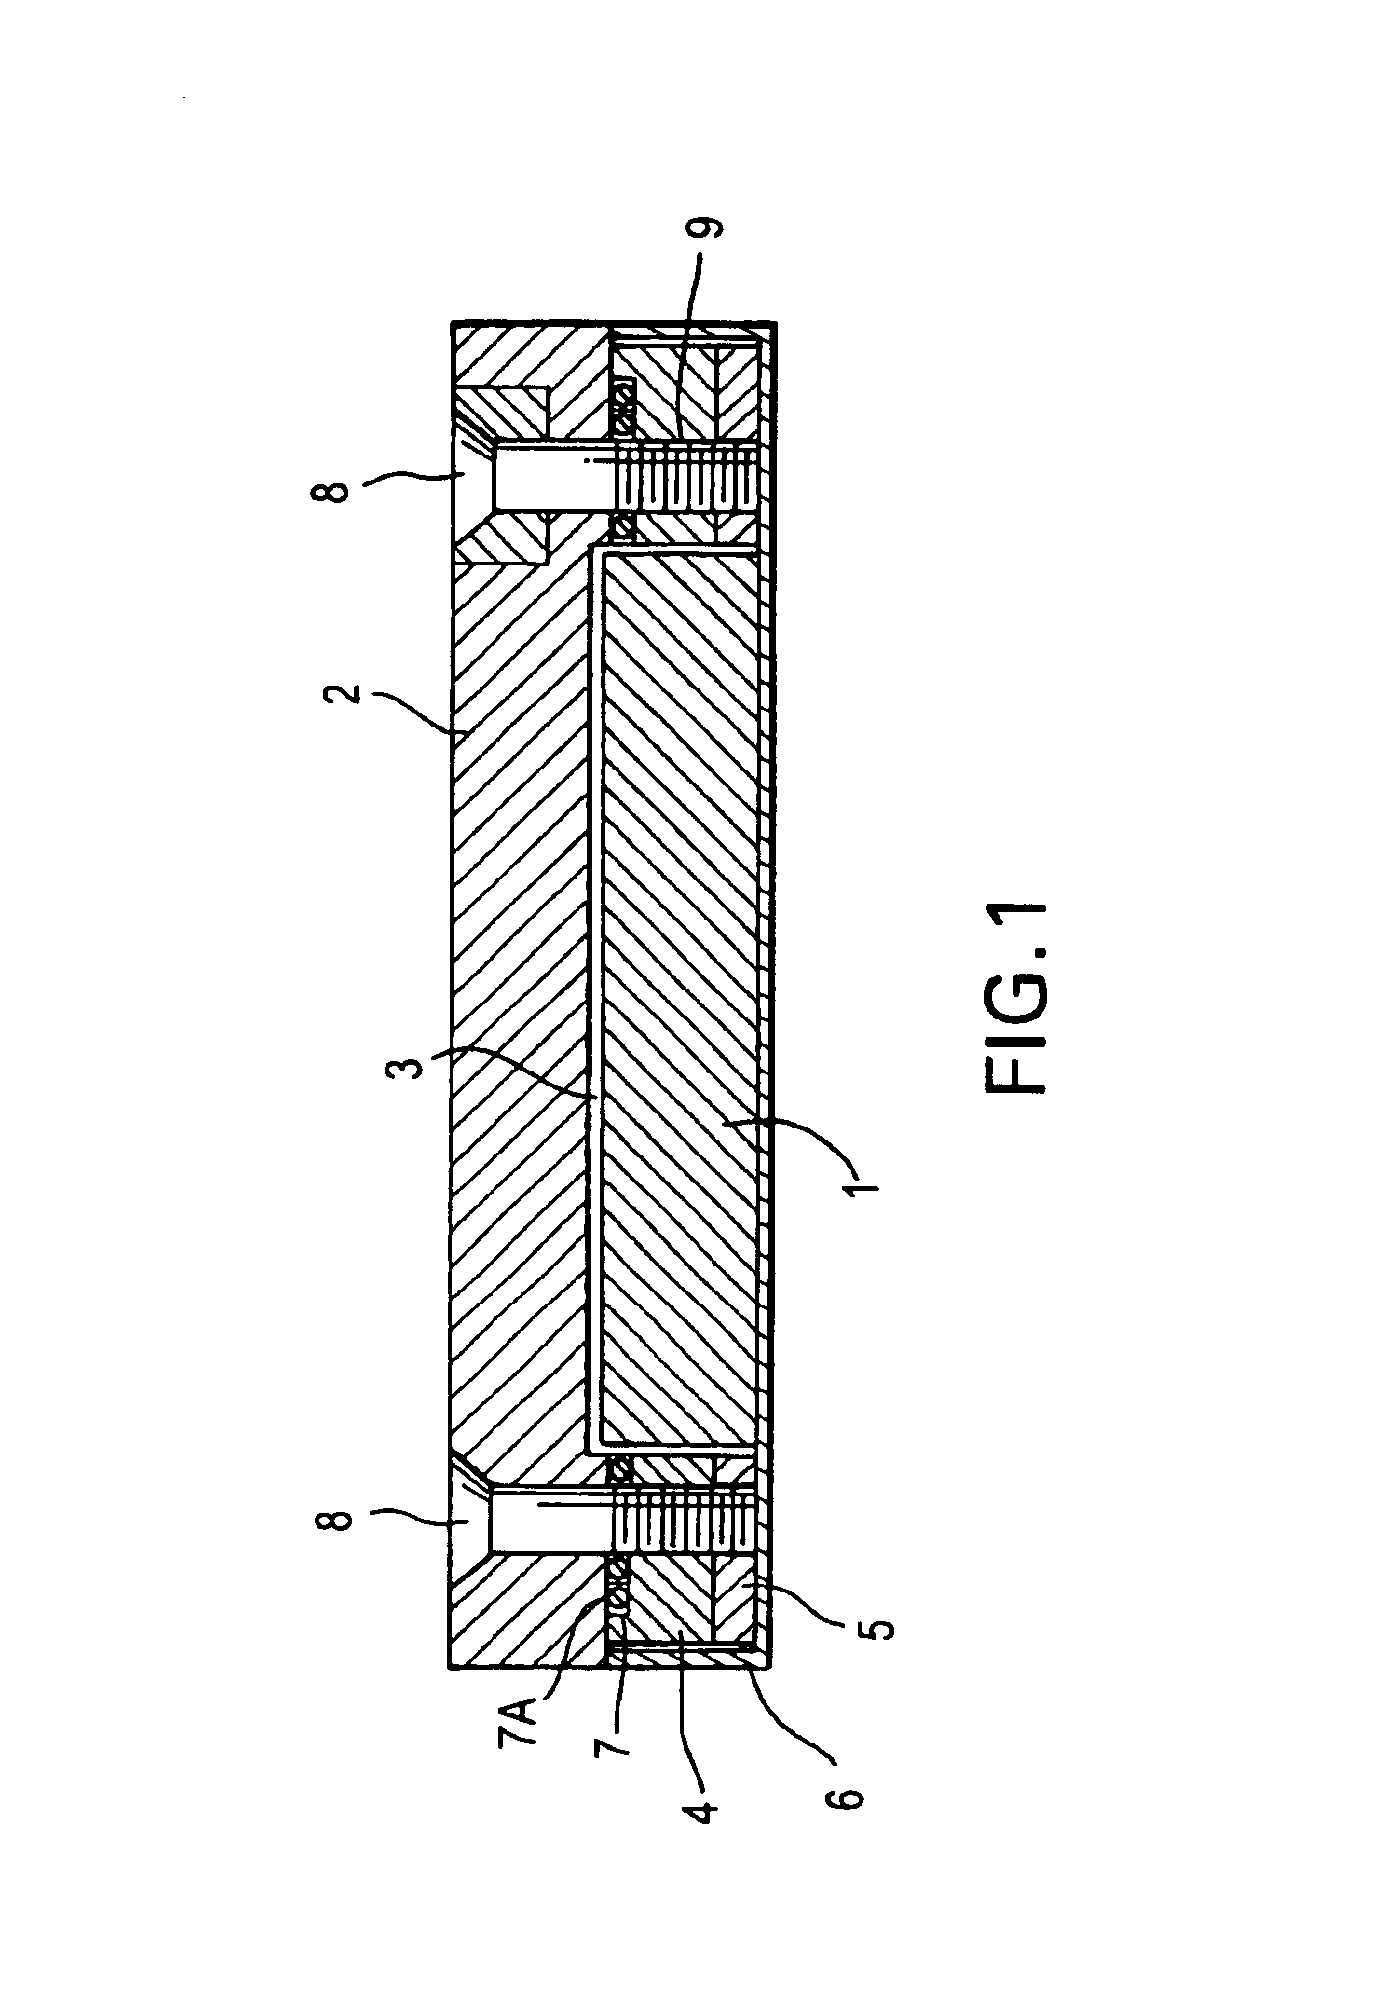 Linear synchronous motor with multiple time constant circuits, a secondary synchronous stator member and improved method for mounting permanent magnets